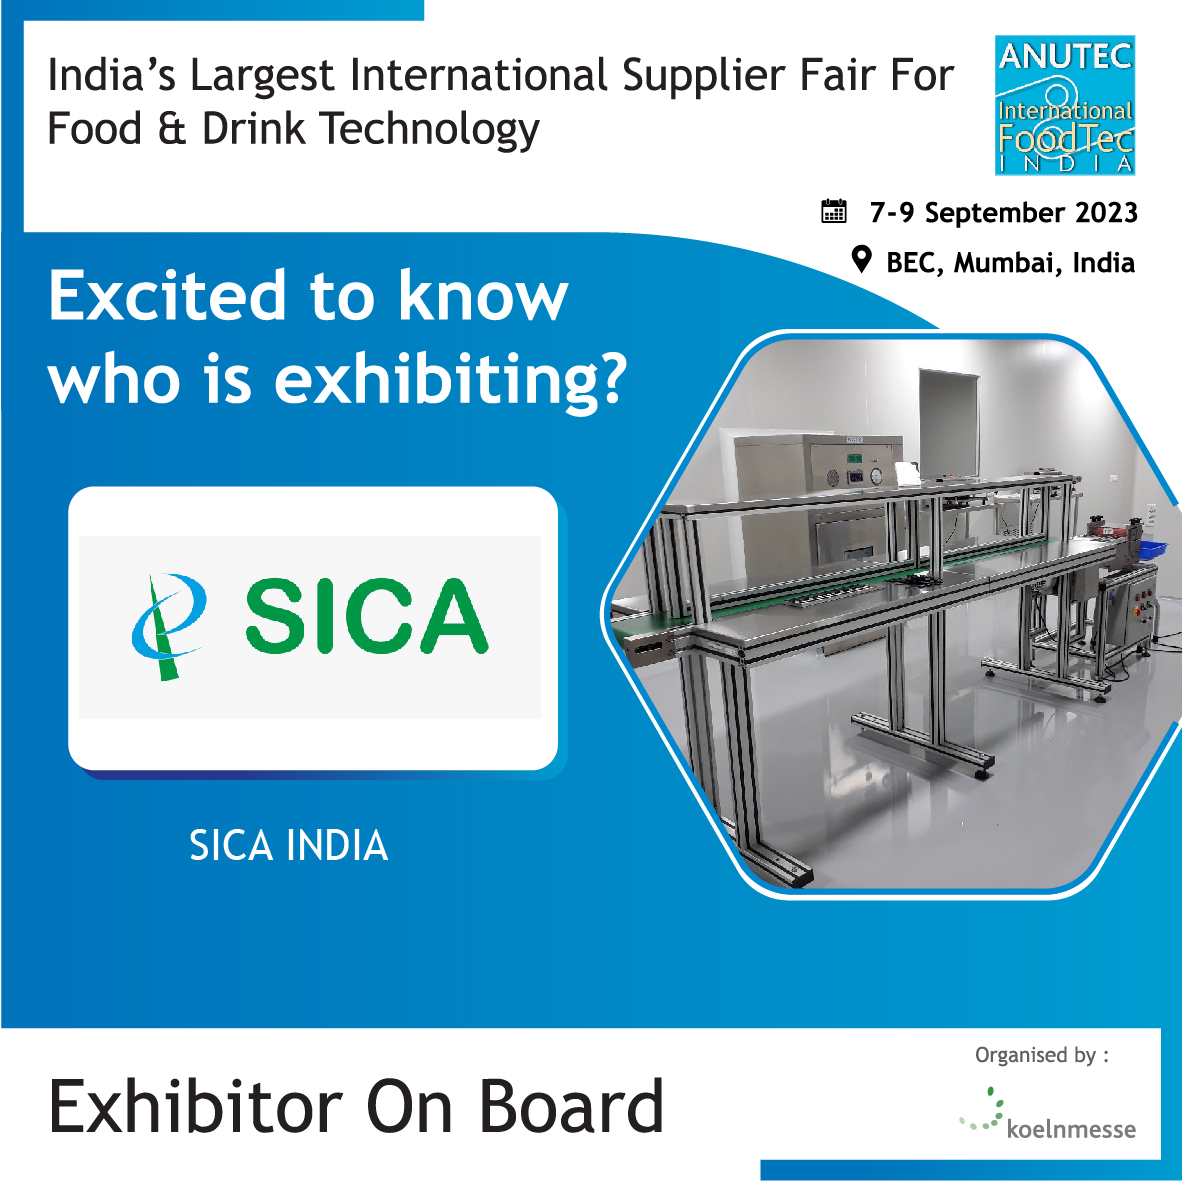 We are thrilled to welcome SICA INDIA as an esteemed exhibitor at ANUTEC – International FoodTec India 2023.

Register to visit: bit.ly/42IVkCG

#anutecindia2023 #koelnmessindia #expoinindia #internationalexpo #Packaging, #PackagingSolutions, #QualityPackaging,